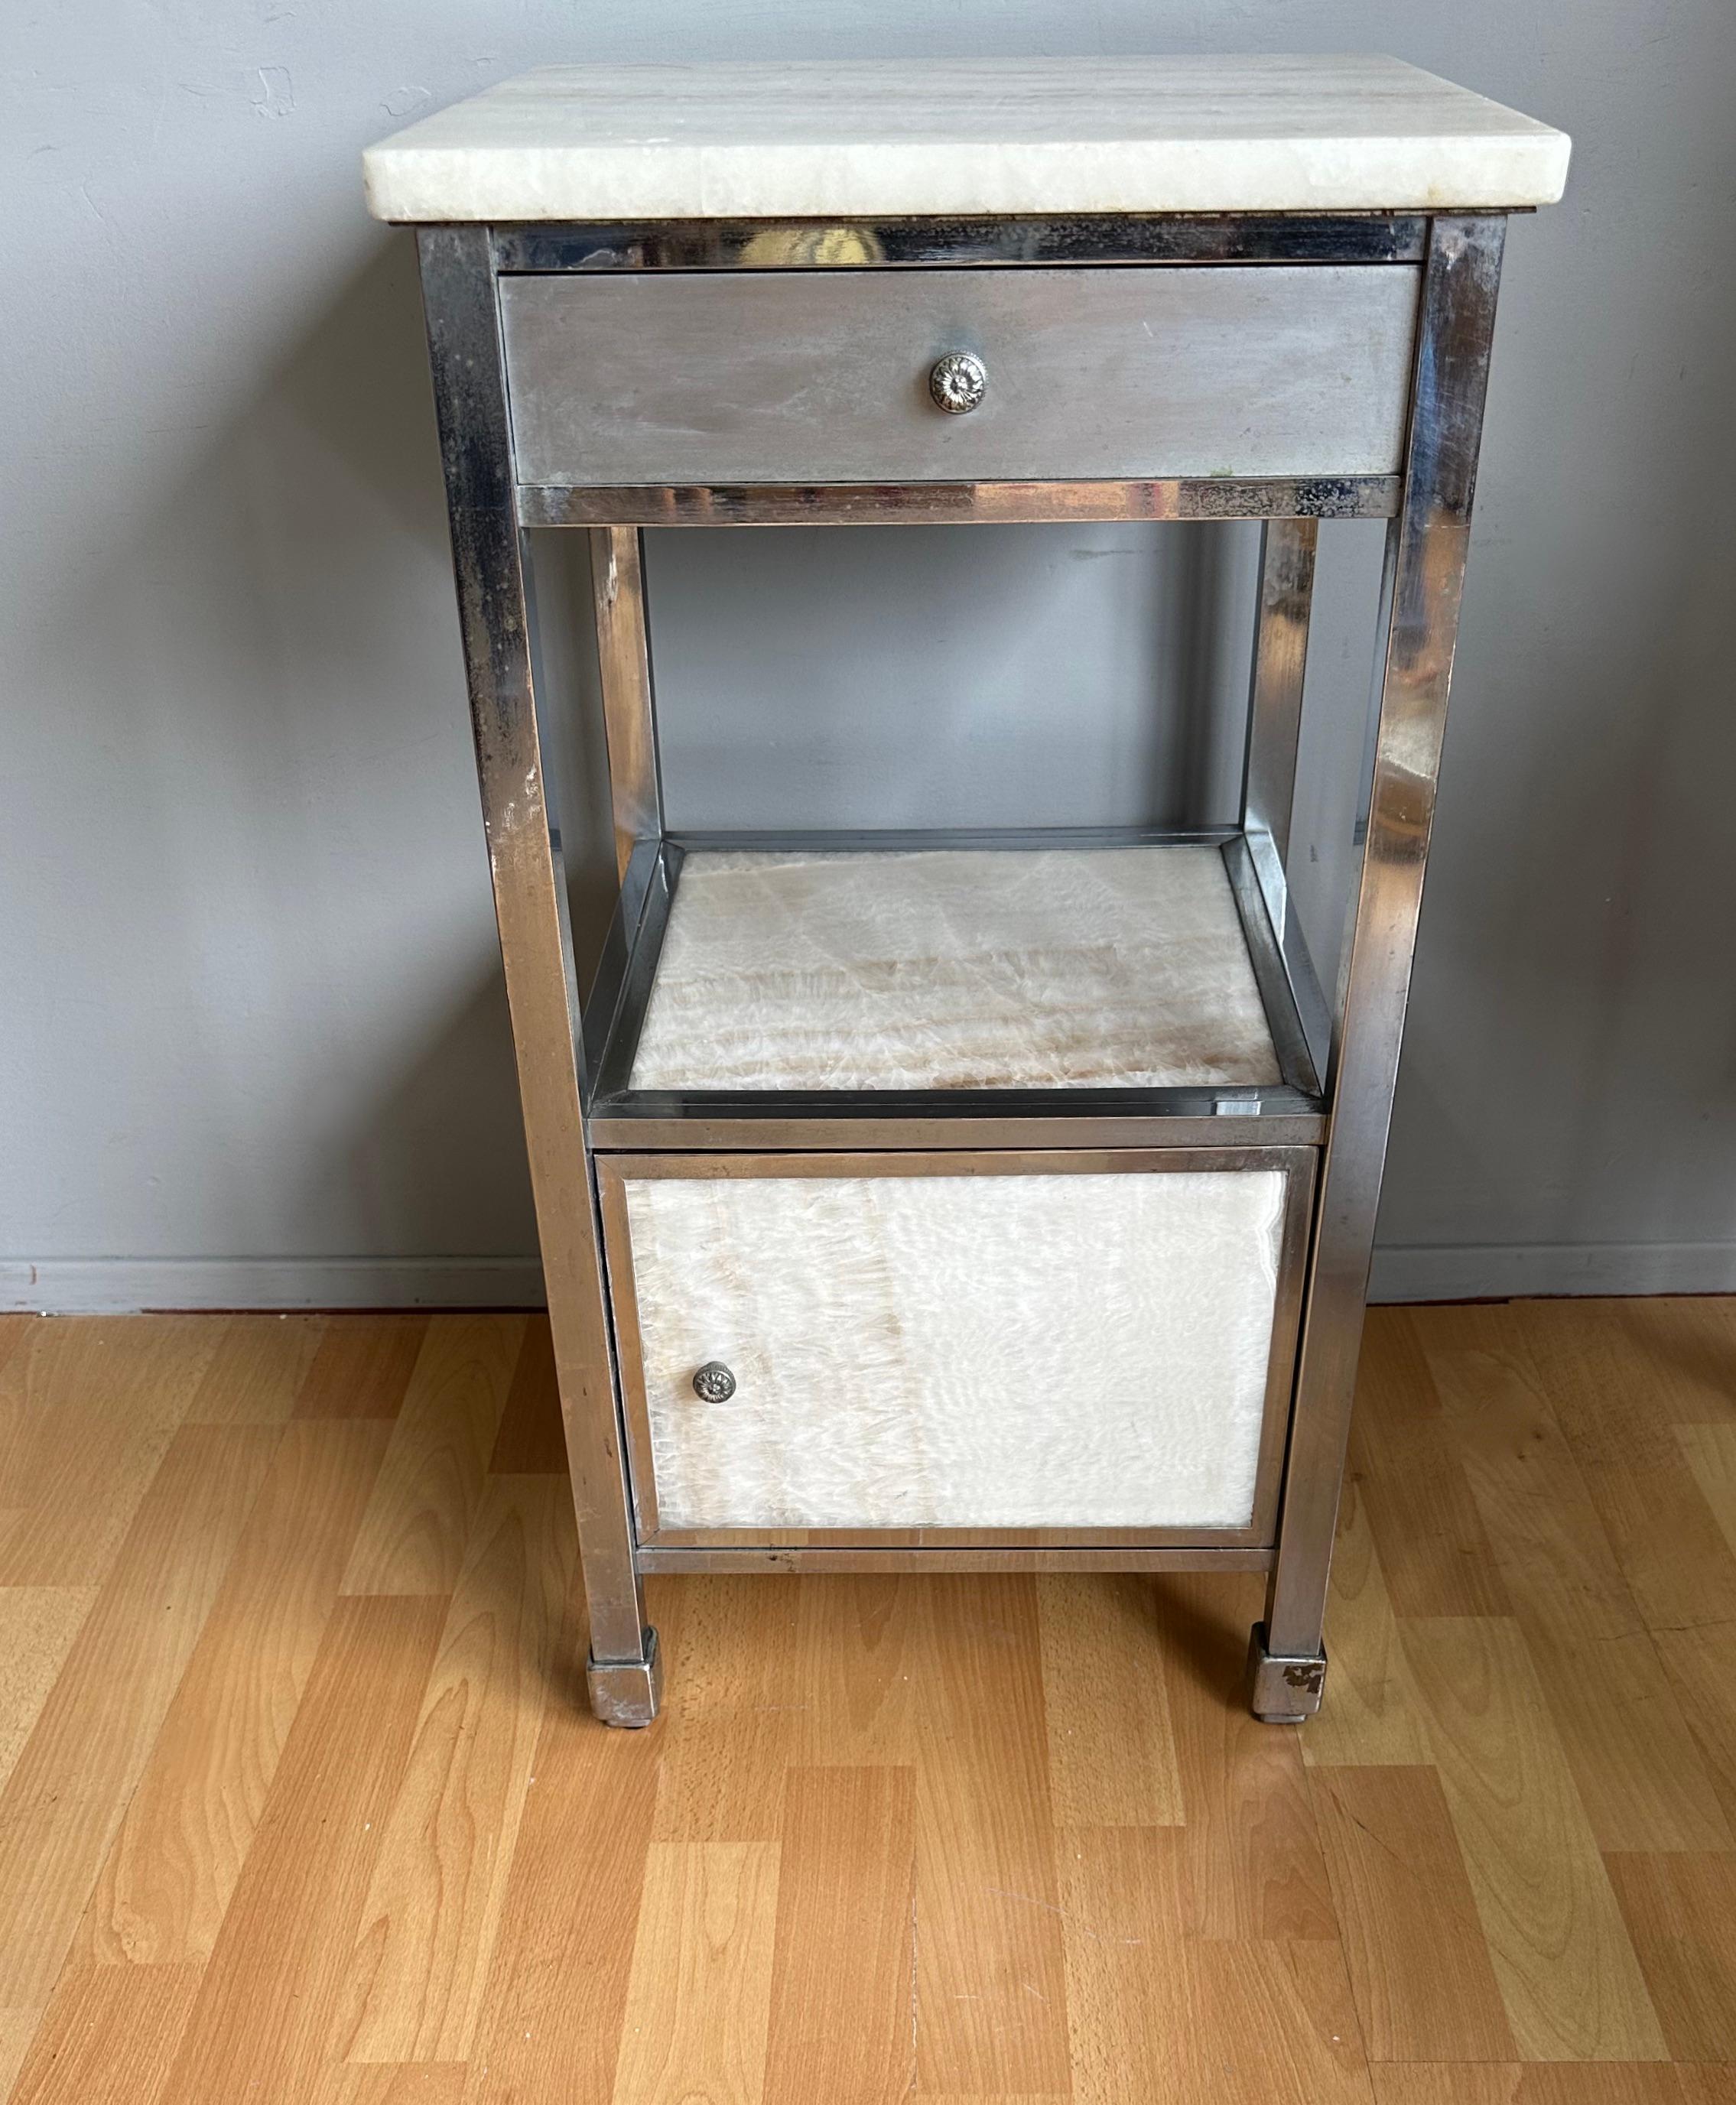 Very rare industrial Art Deco cabinet with onyx marble panels and top.

If you are looking for unique and beautifully handcrafted pieces to decorate your home or business then this Art Deco era cabinet could be yours to own and enjoy soon. This